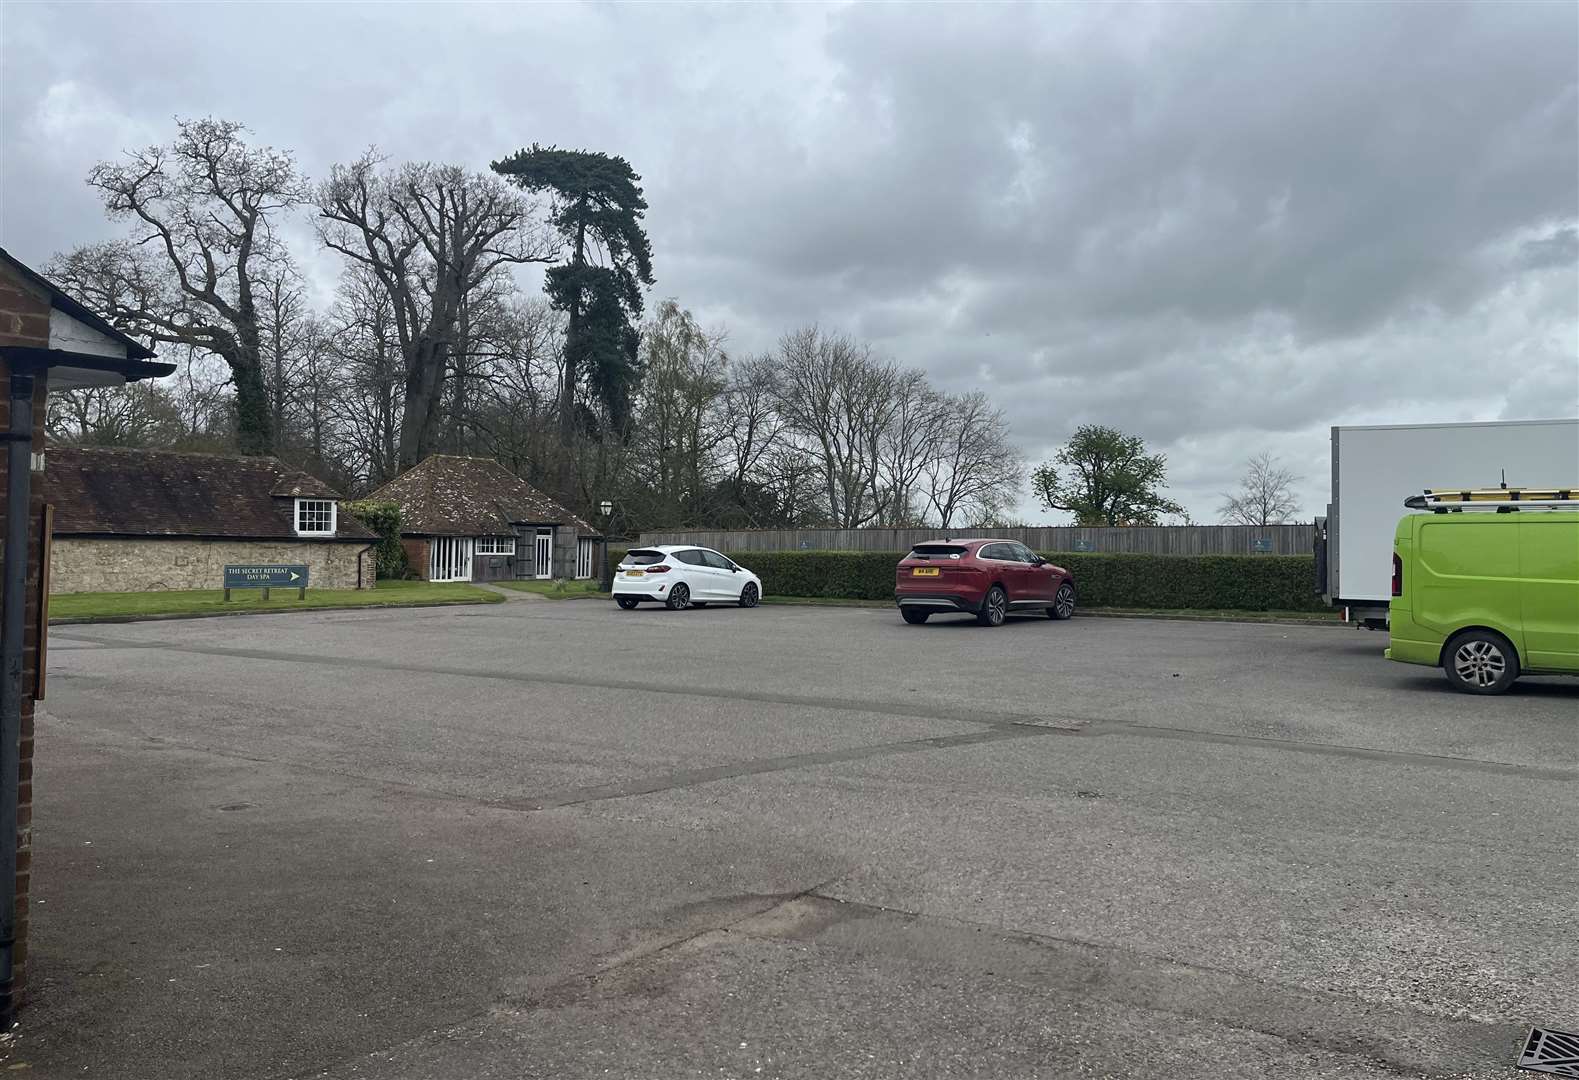 This area used for disabled parking is earmarked for five additional units at Mersham-le-Hatch Business Village; the current disabled parking will be moved into the existing car park